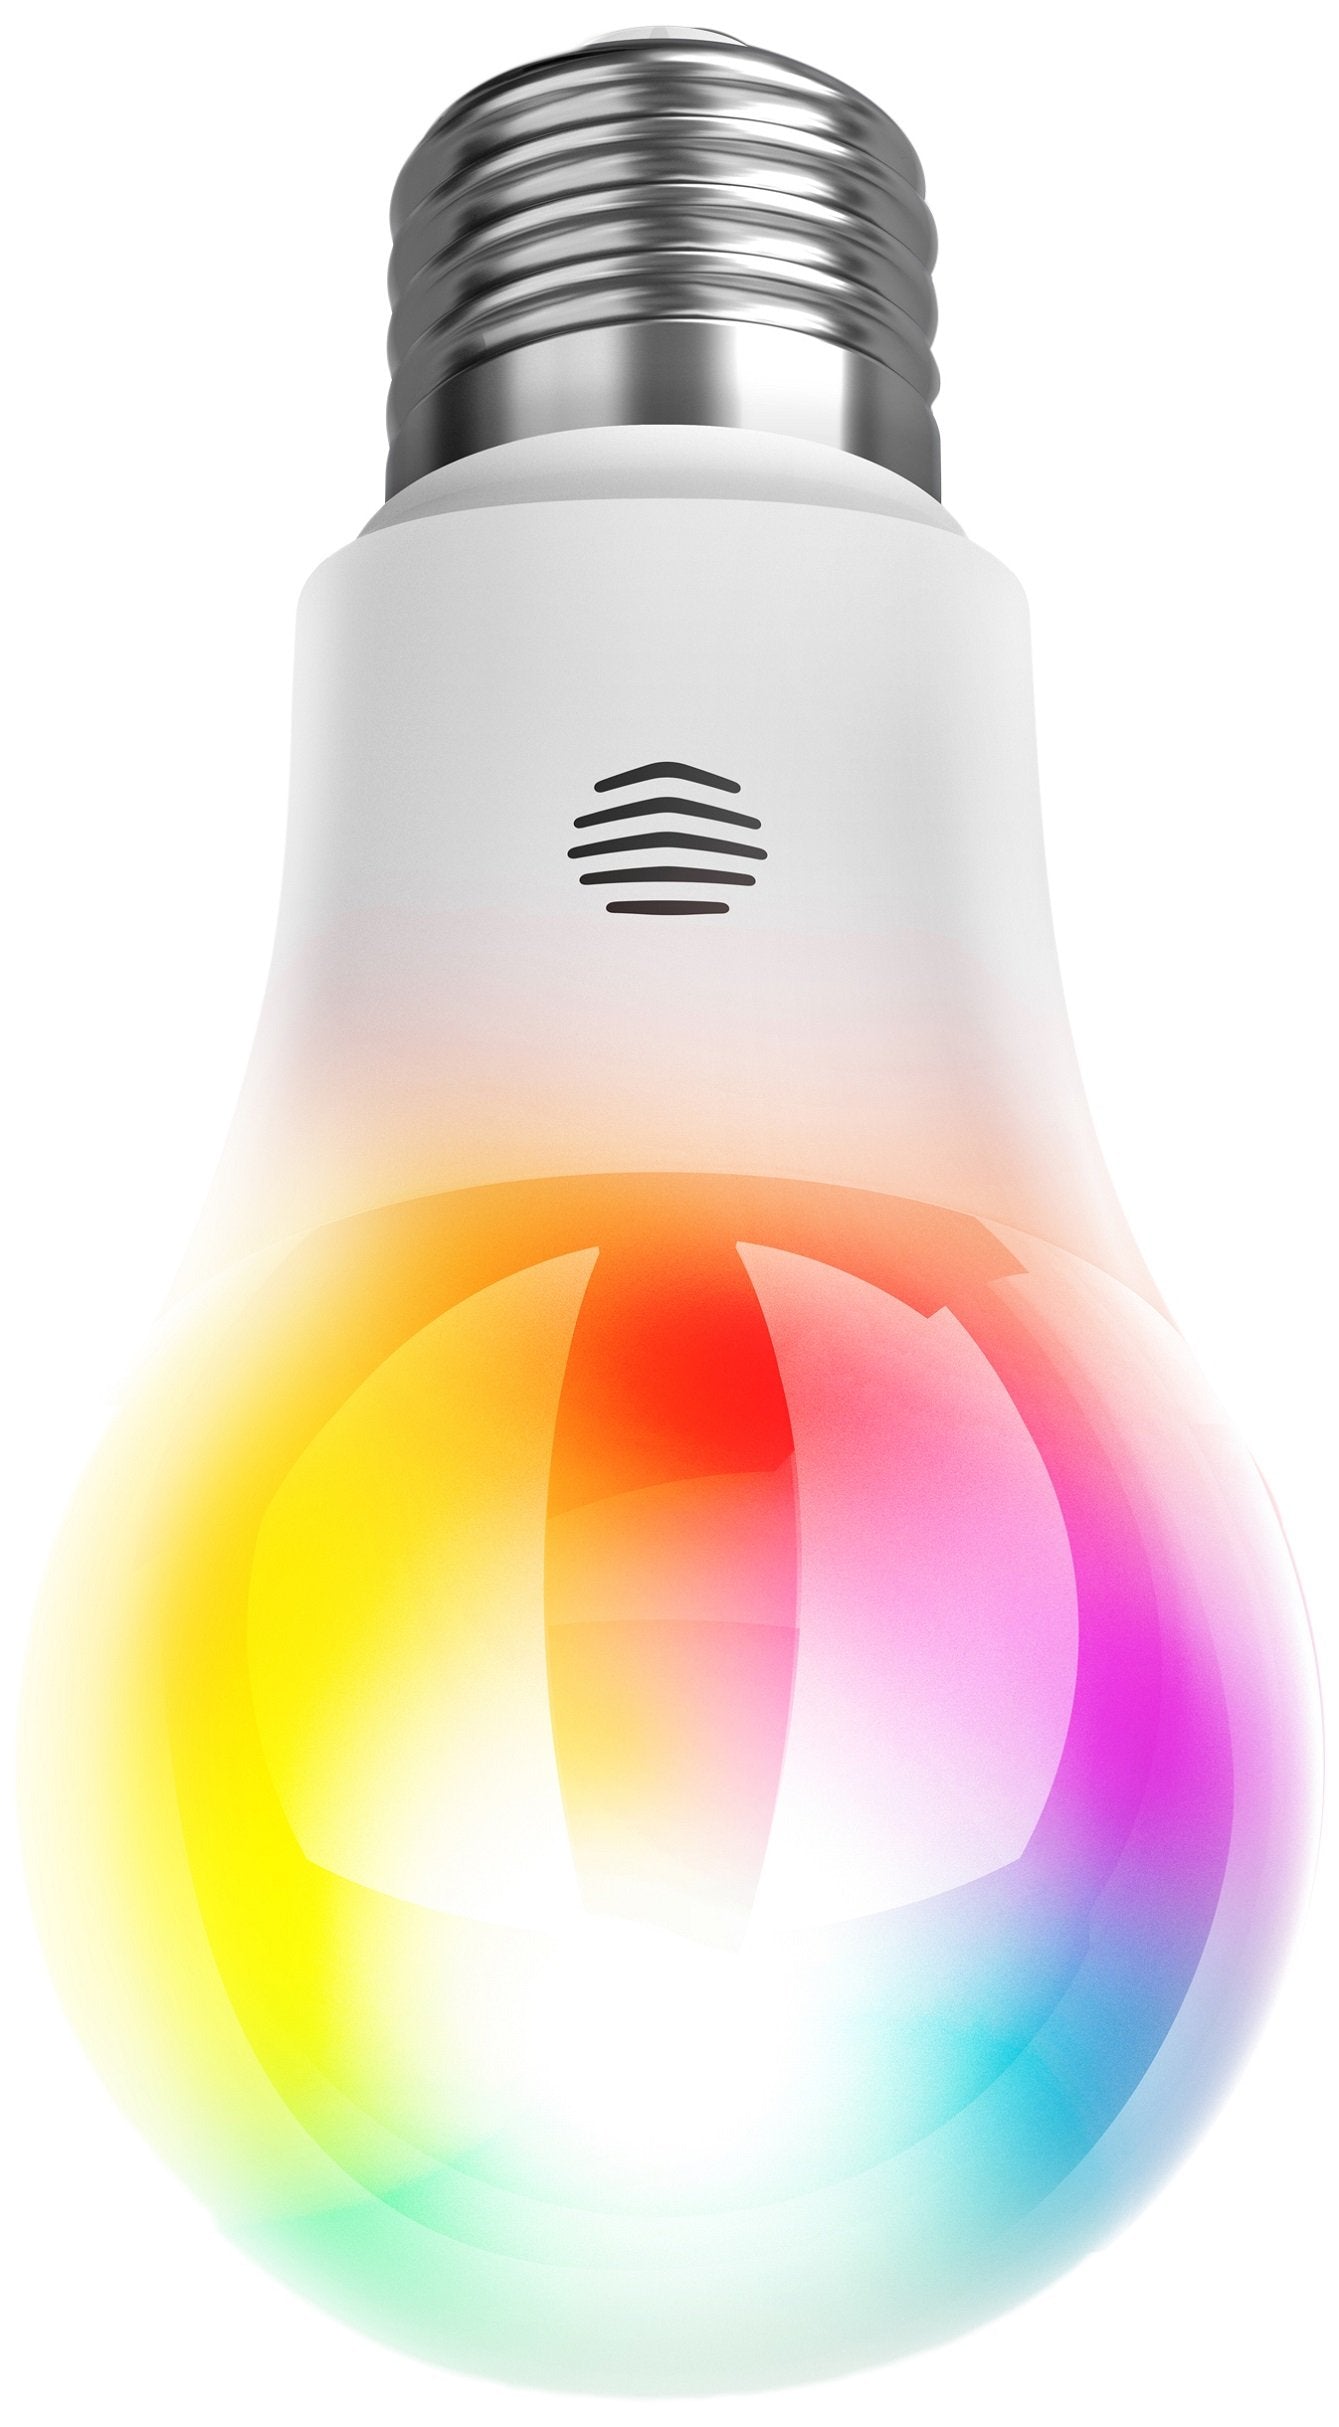 Hive Light Colour Changing Smart Bulb with E27 Screw-Works with Amazon Alexa, 9.5 W